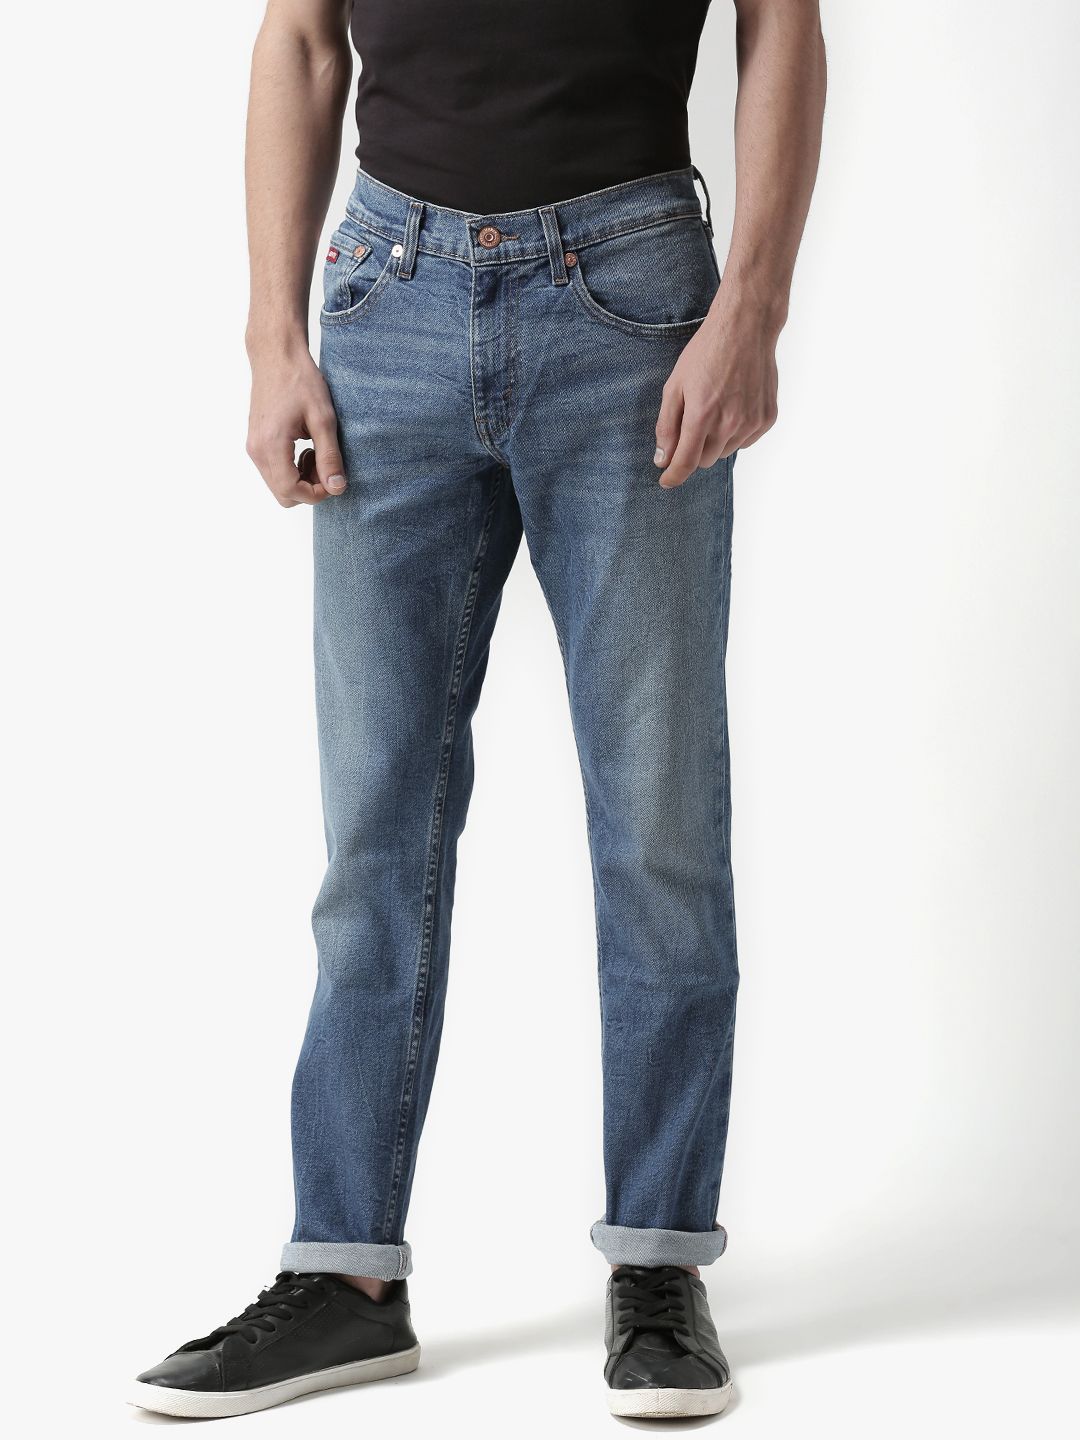 Levis Blue Washed Skinny Fit Jeans for men price - Best buy price in ...